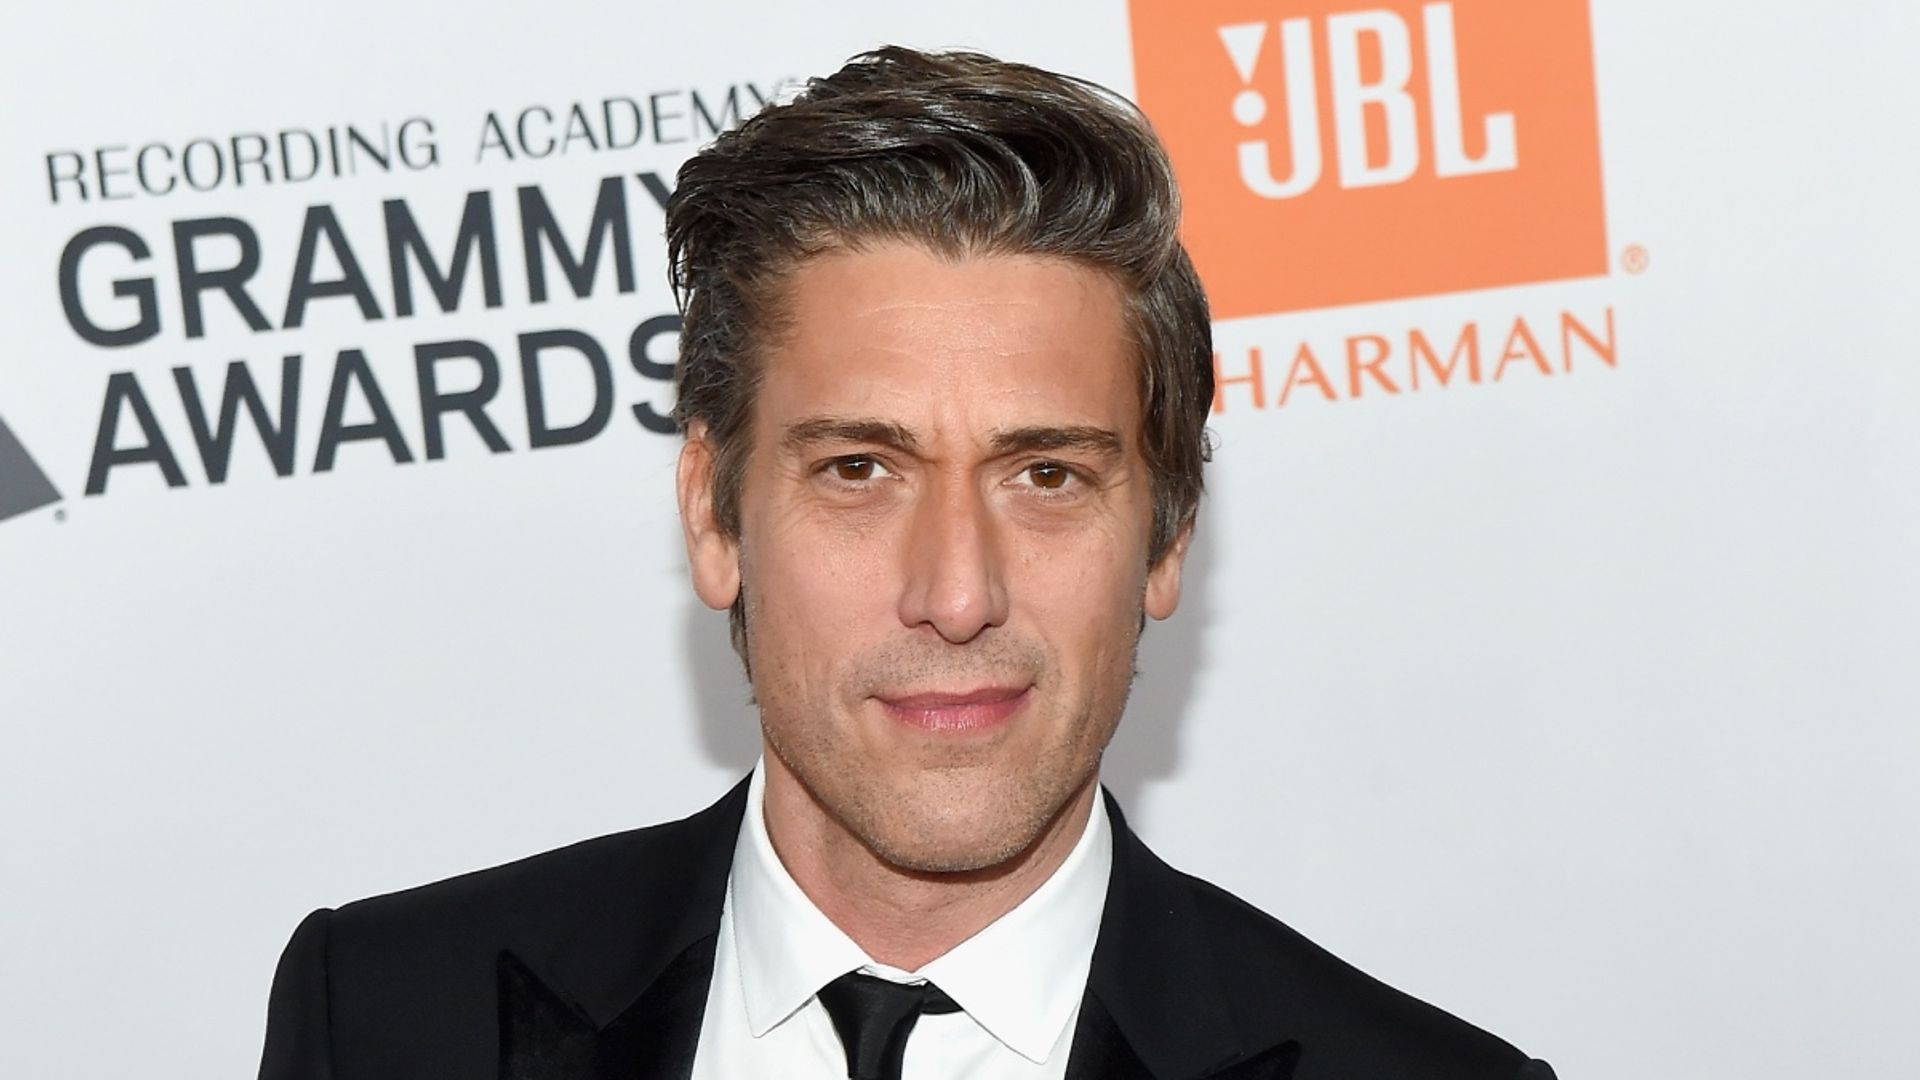 David Muir embarks on special night out in honor of ABC co-star